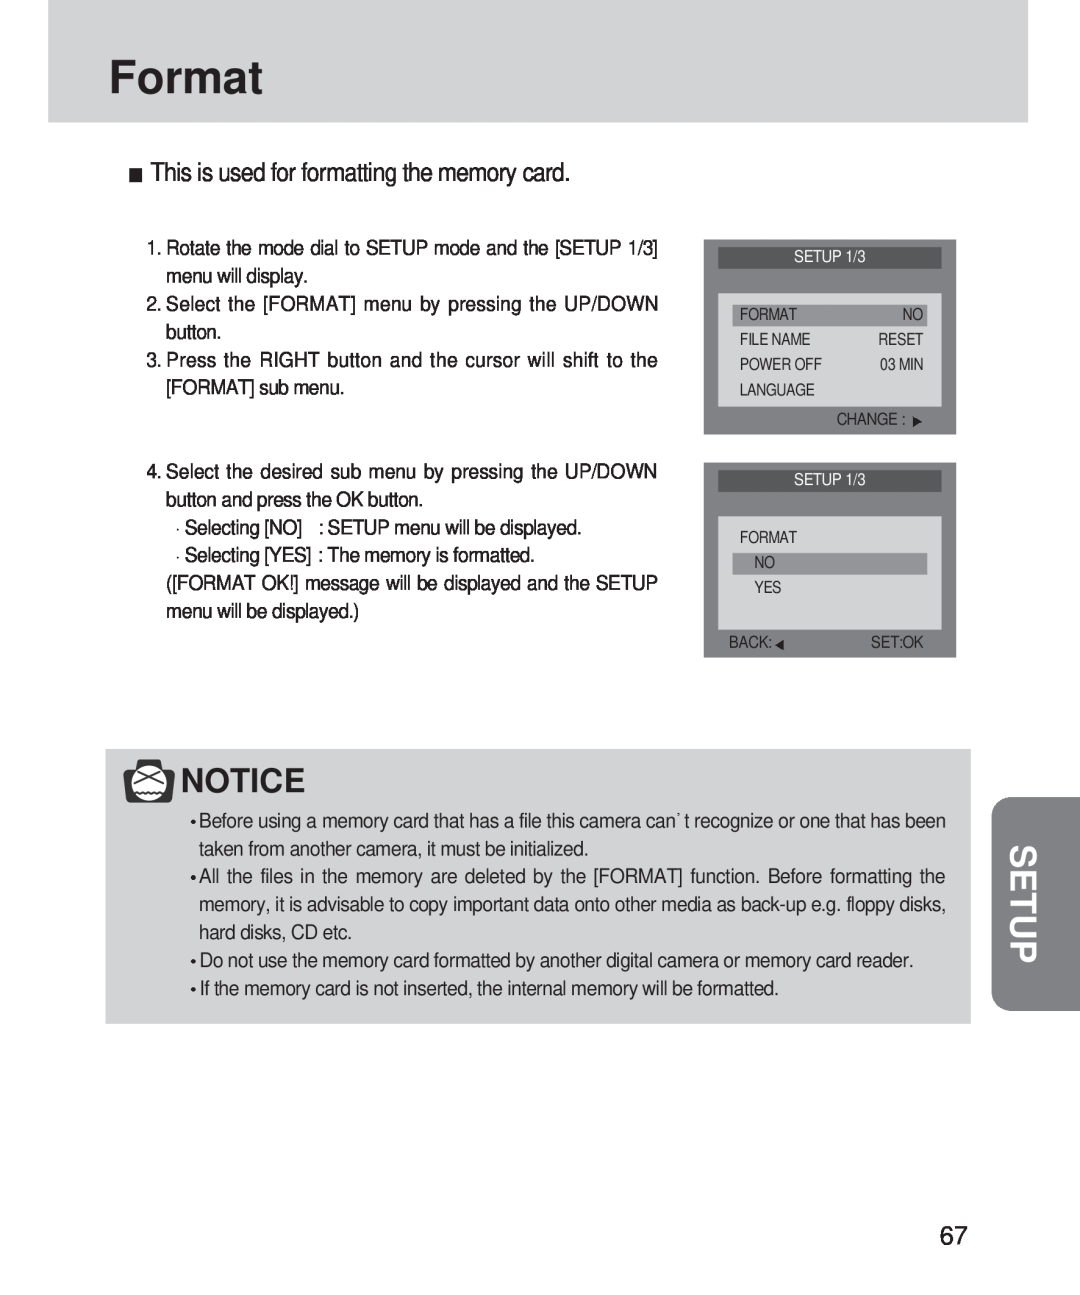 Samsung 420 manual Format, Setup, This is used for formatting the memory card 